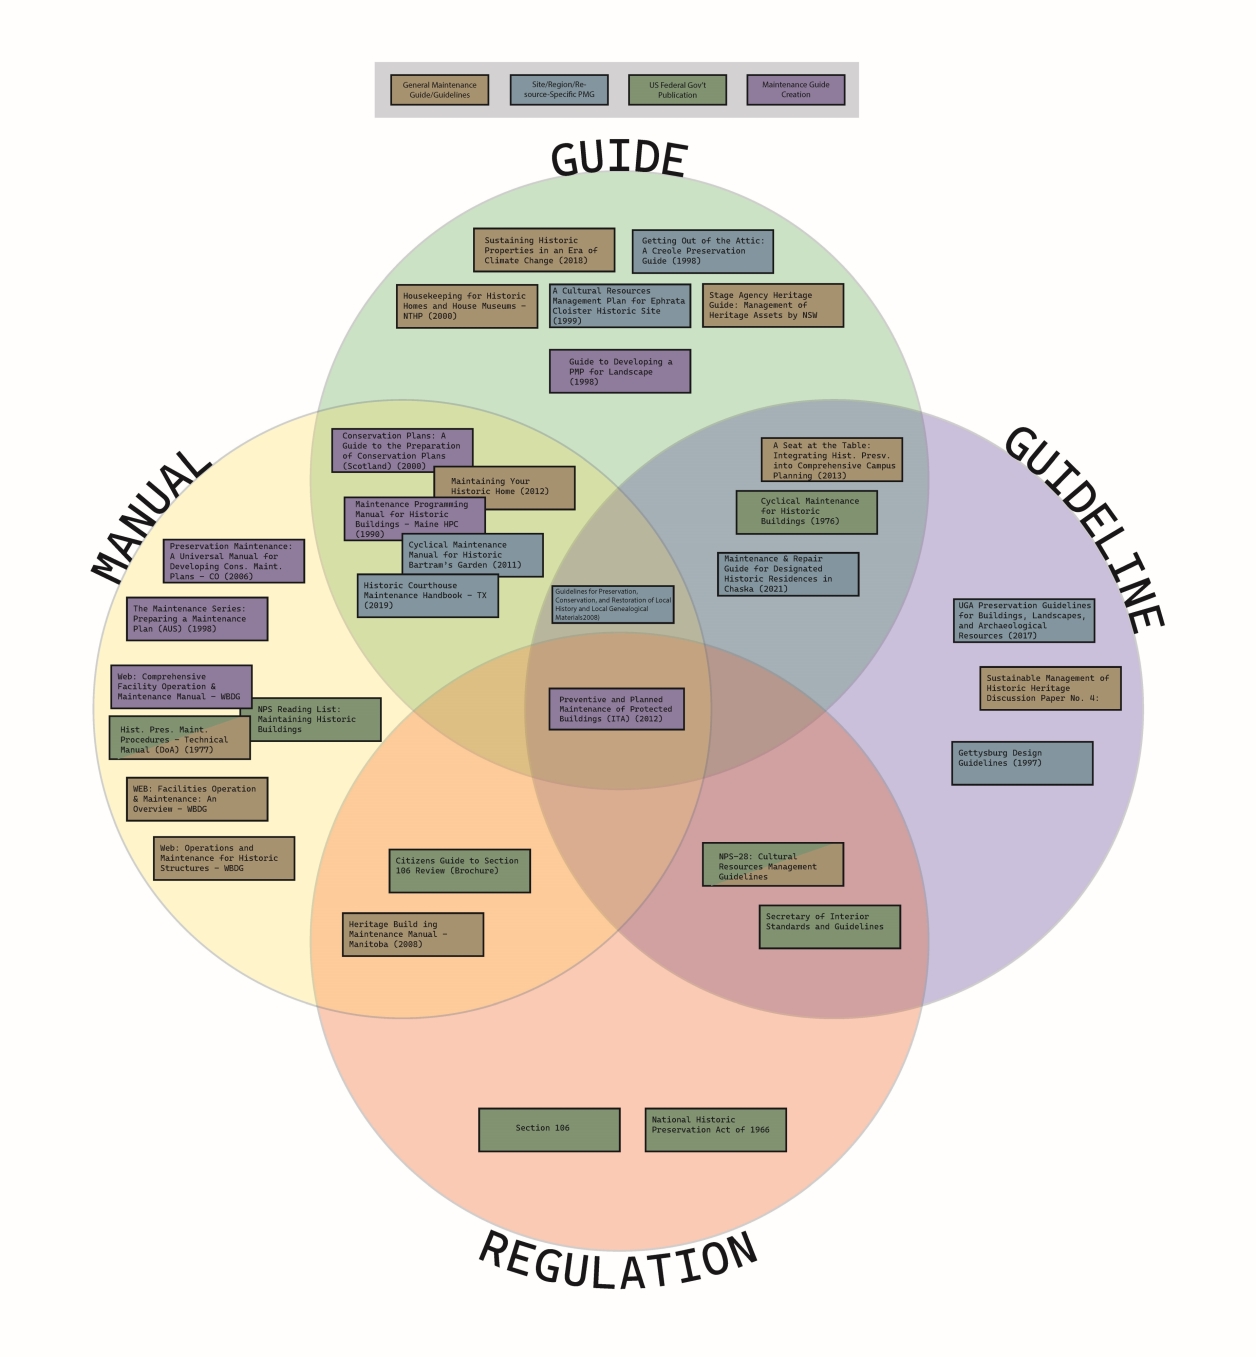 Venn Diagram relating 32 documents dedicated to maintenance practices and their overlapping categorization as guides, guidelines, manuals, and regulations. (Source: Cohan, 2023)